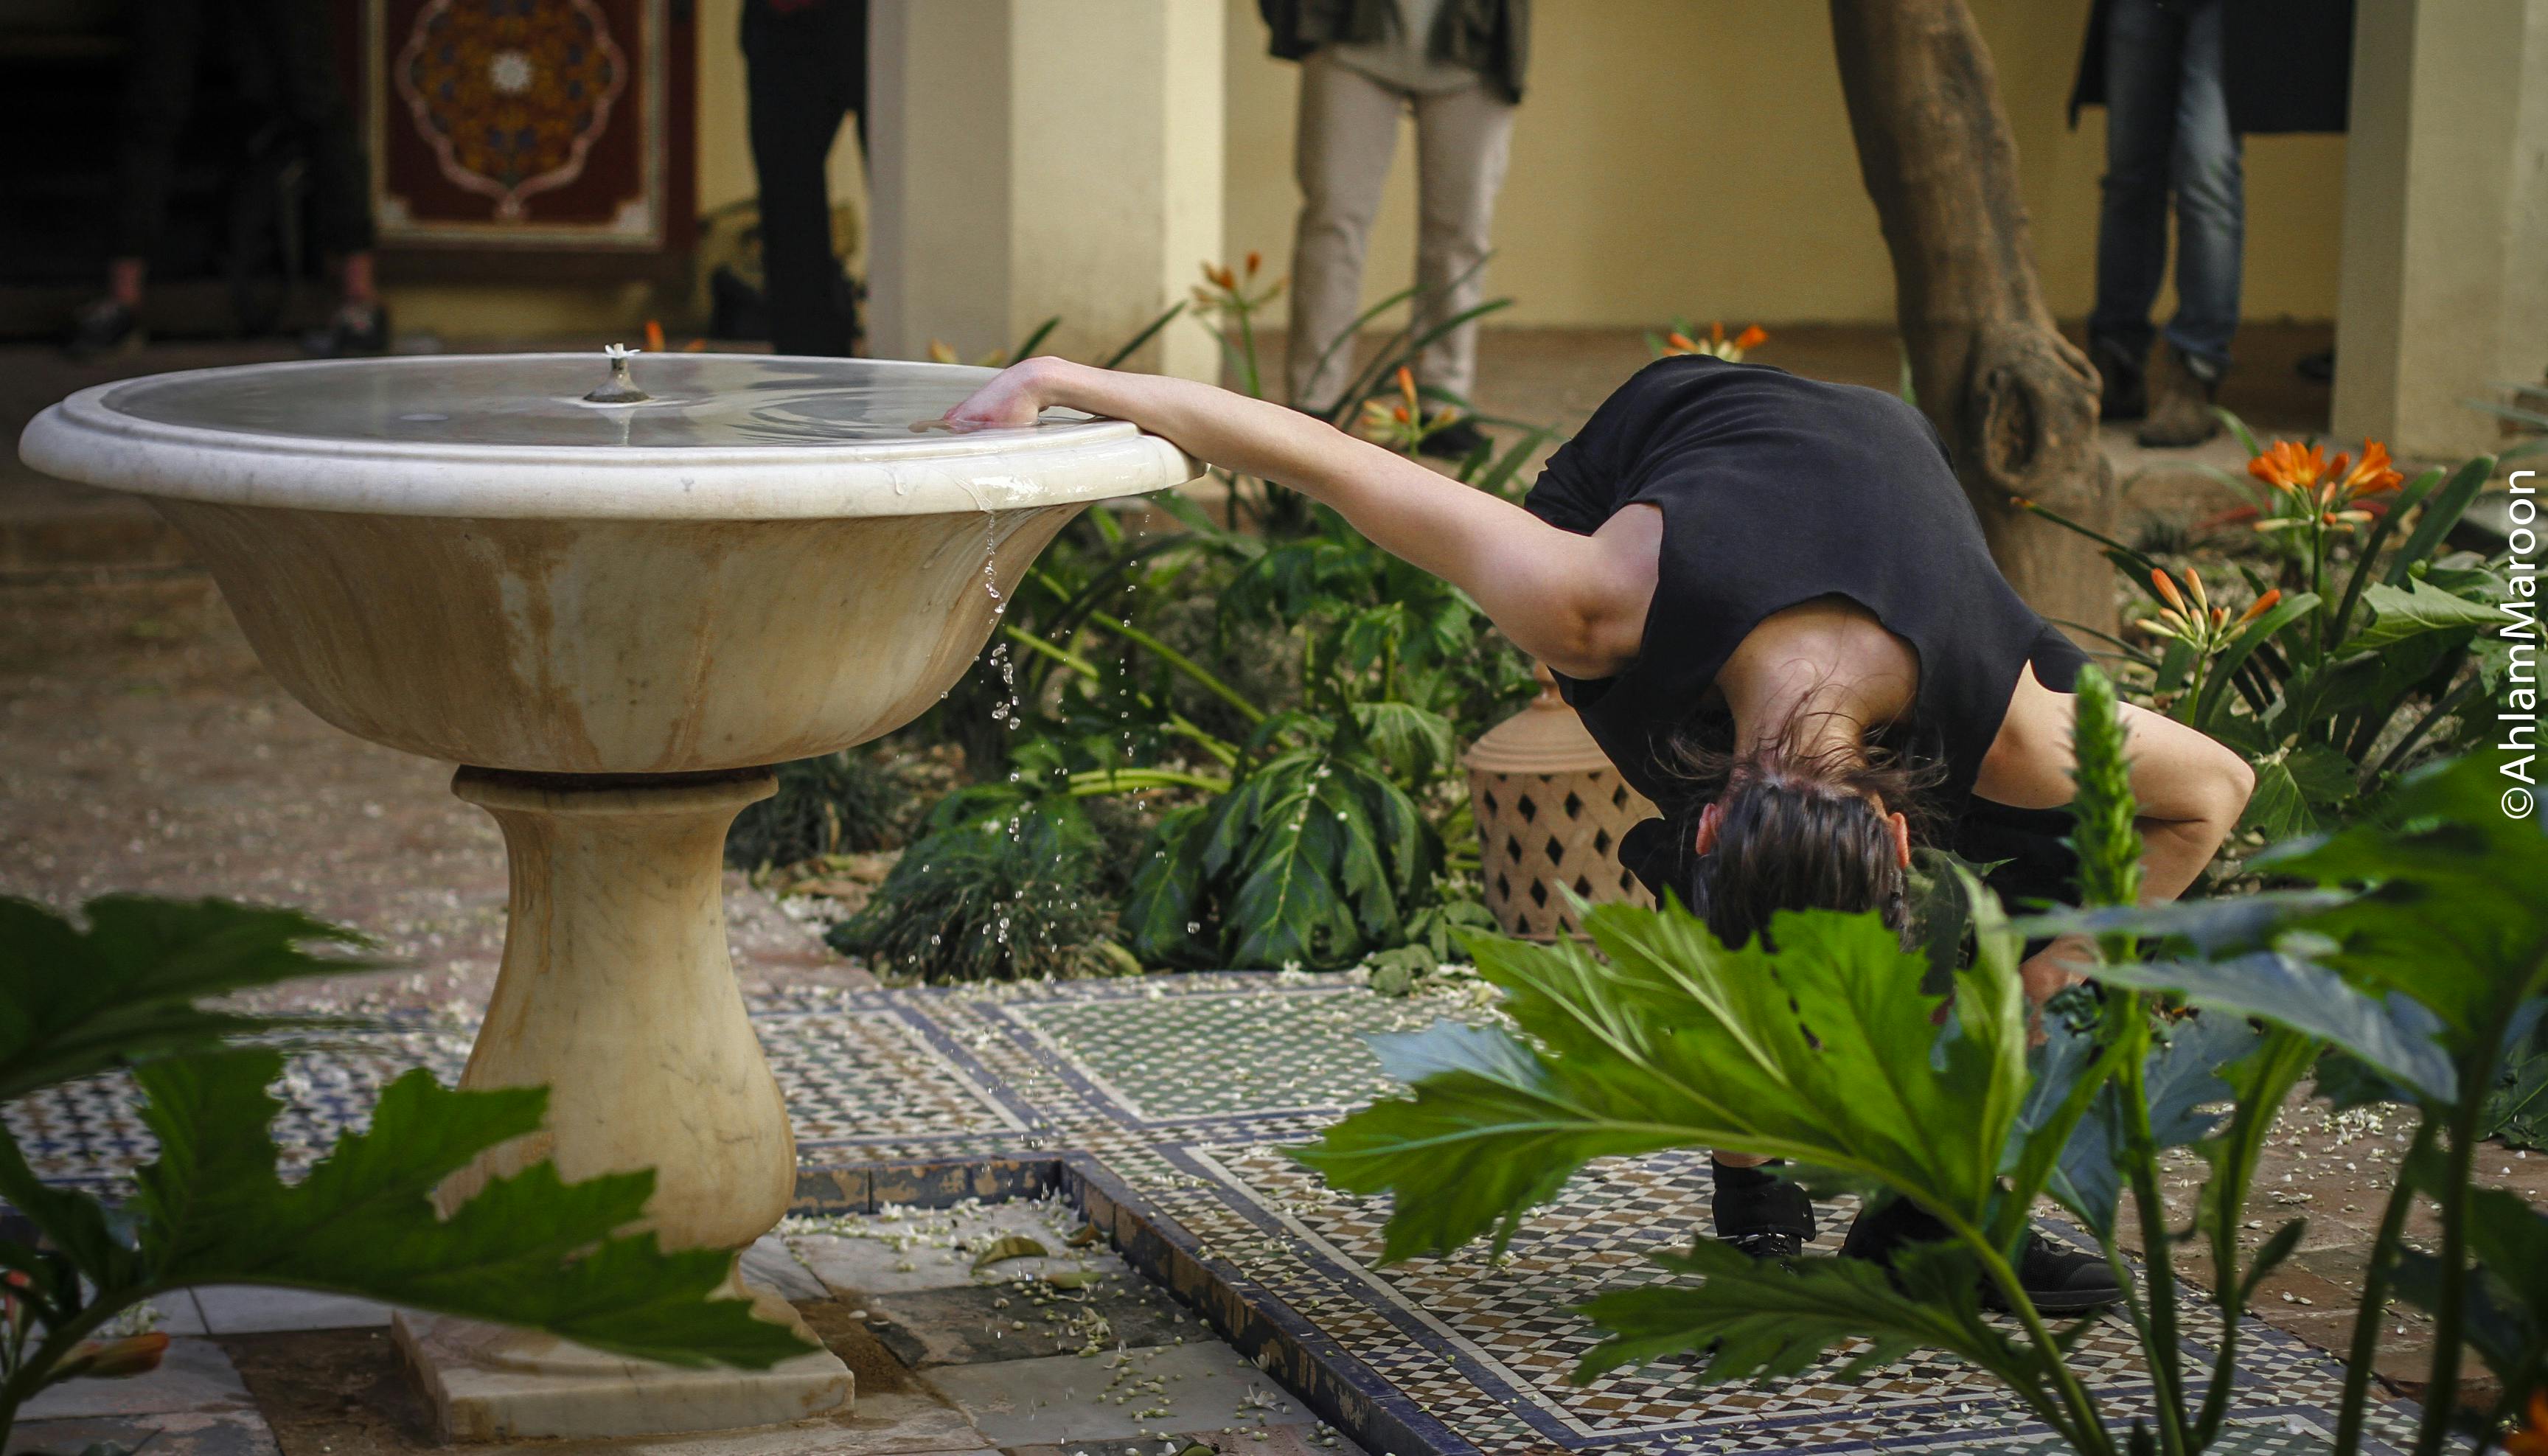 Annamaria Ajmone in an interior courtyard, surrounded by short plants with large leaves and orange flowers. She has one hand inside a fountain while bending with the rest of her body forward, almost to the ground. Behind her, under the colonnade, stands the audience.